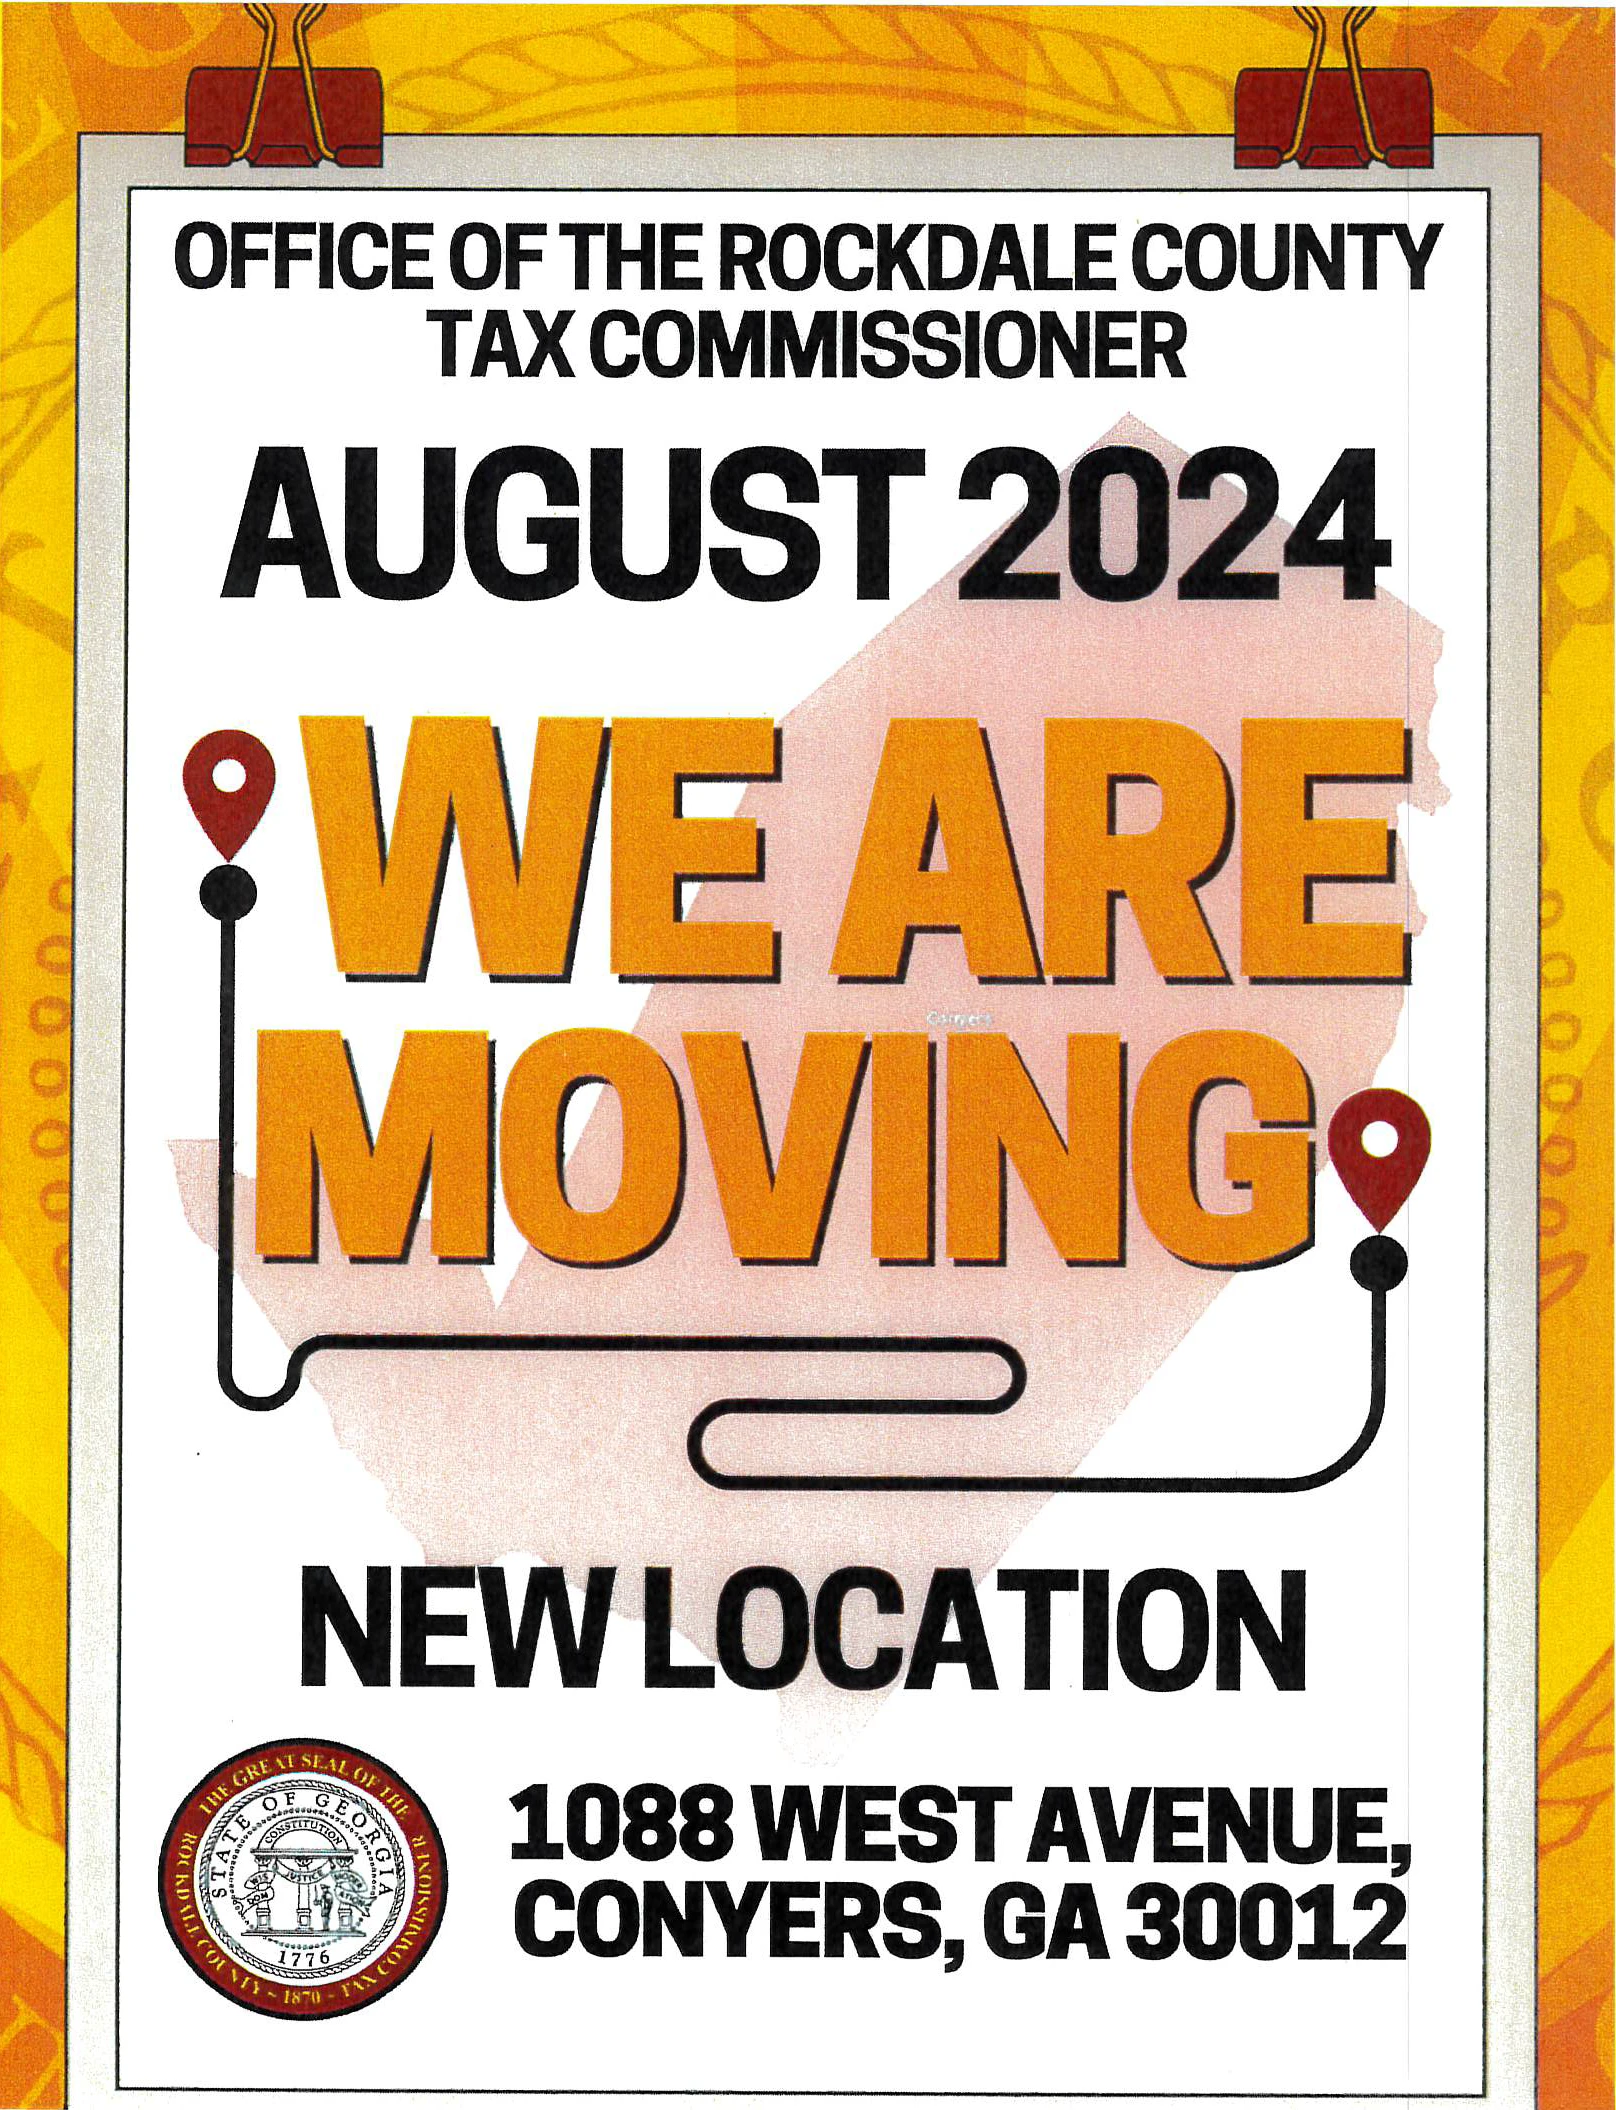 August 2024 - We Are Moving to a new location. 1088 West Ave, Conyers, GA 30012